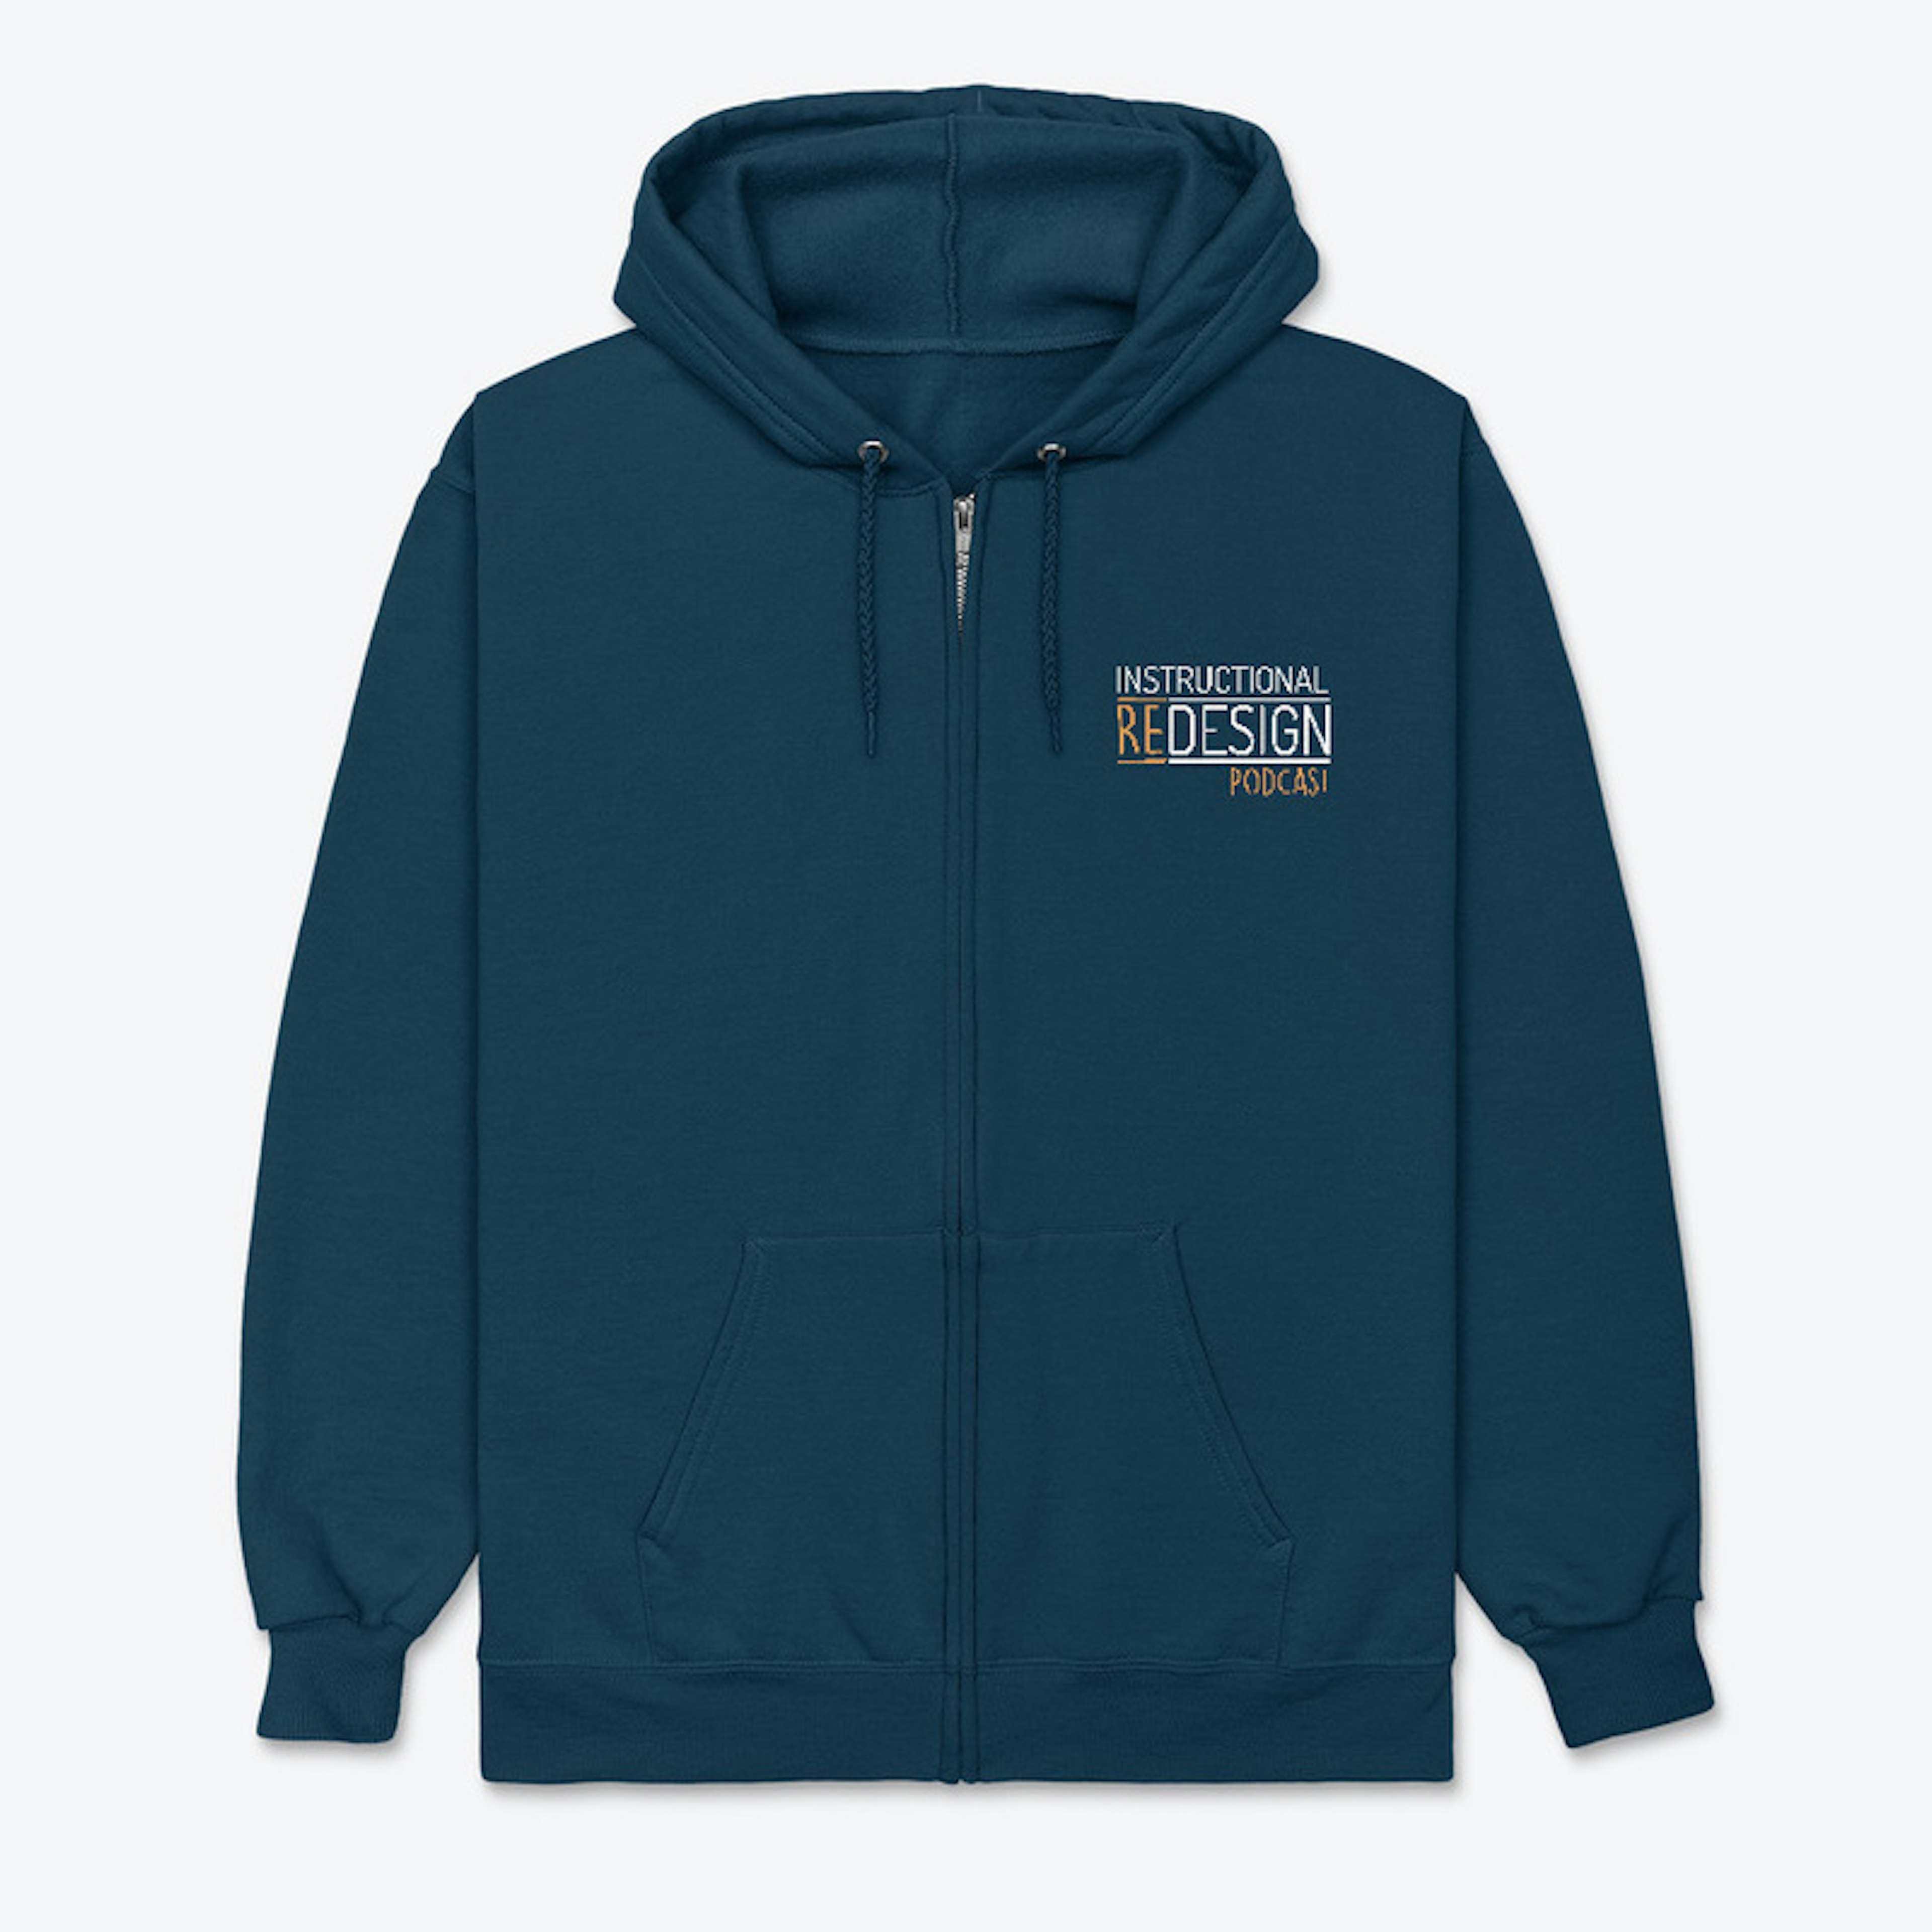 Instructional Redesign Hoodie